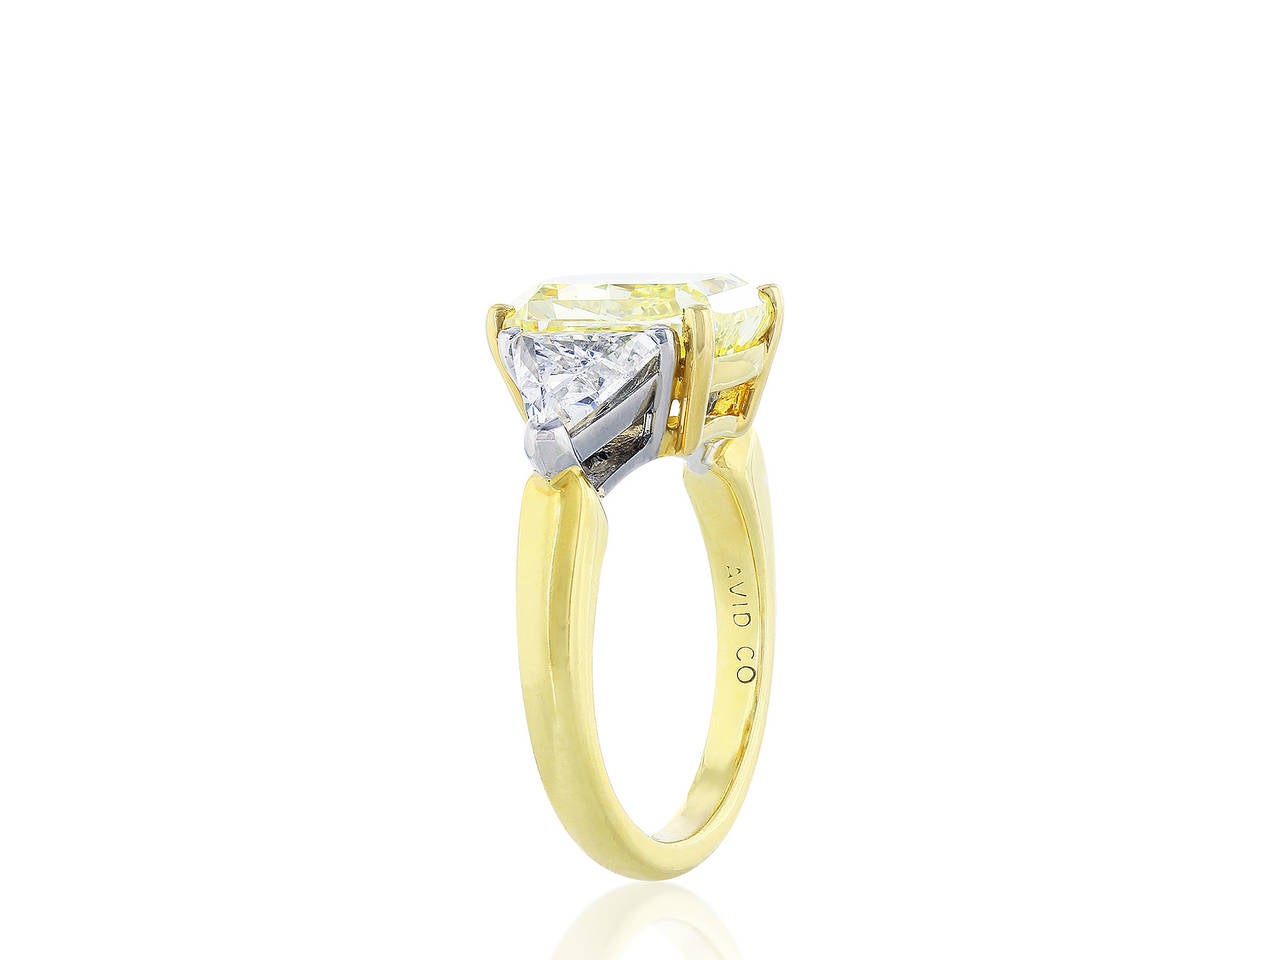 Platinum and 18 karat yellow gold 3 stone diamond ring consisting of one center radiant diamond weighing 4.01 carats having a color and clarity of  FY/VS2, measuring 9.96 x 7.56 x 5.51mm with GIA certificate #11762126.  The center stone is flanked